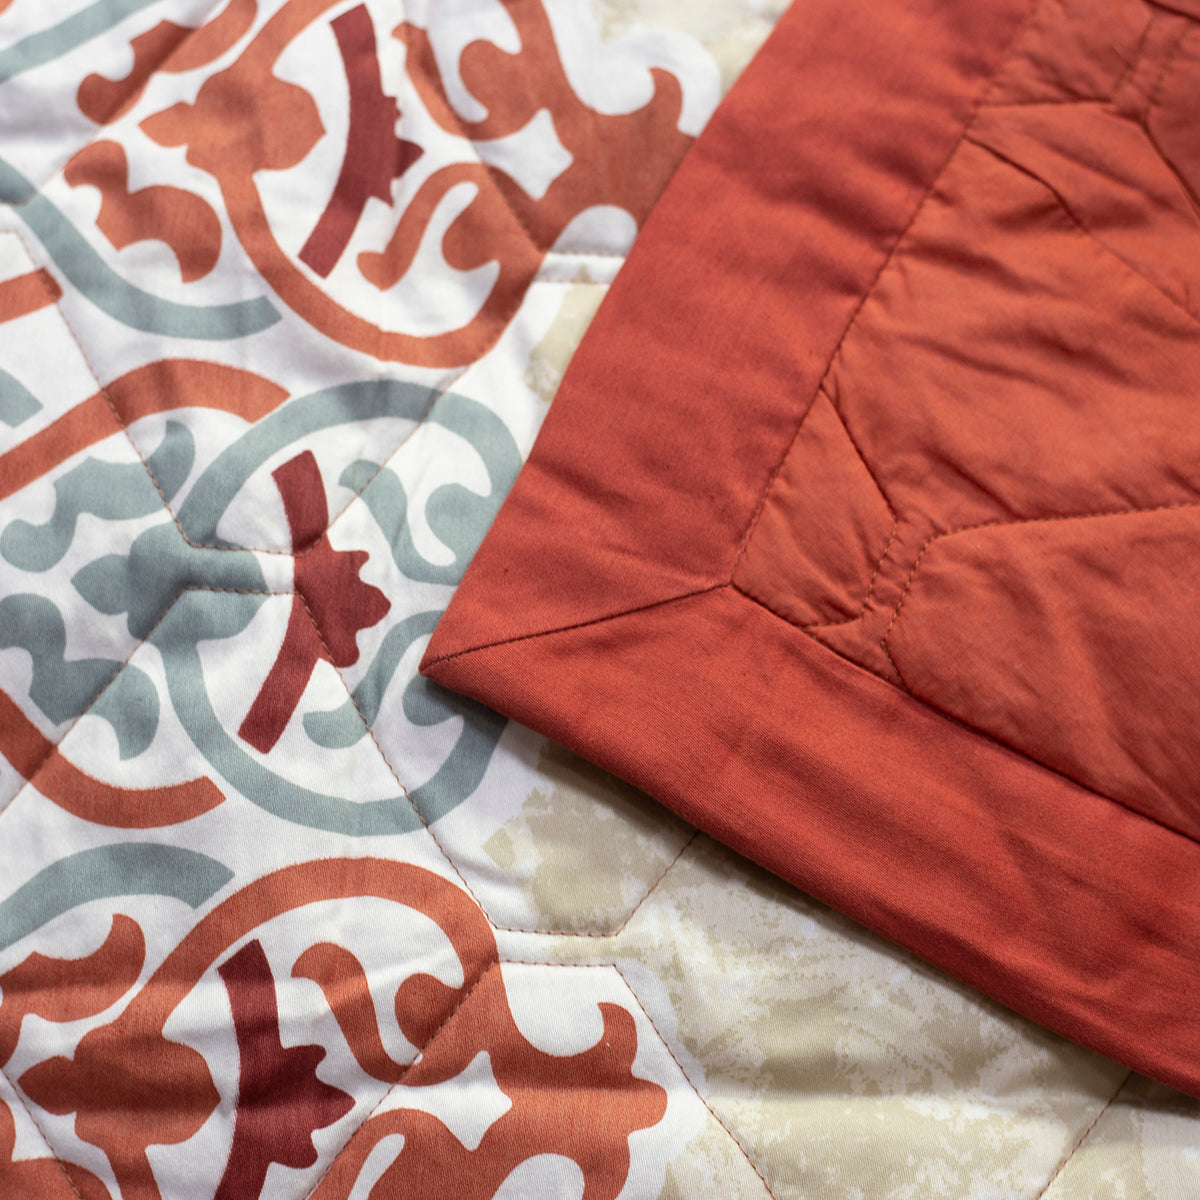 Nouveau Tradition Kaleen Global Red Quilt